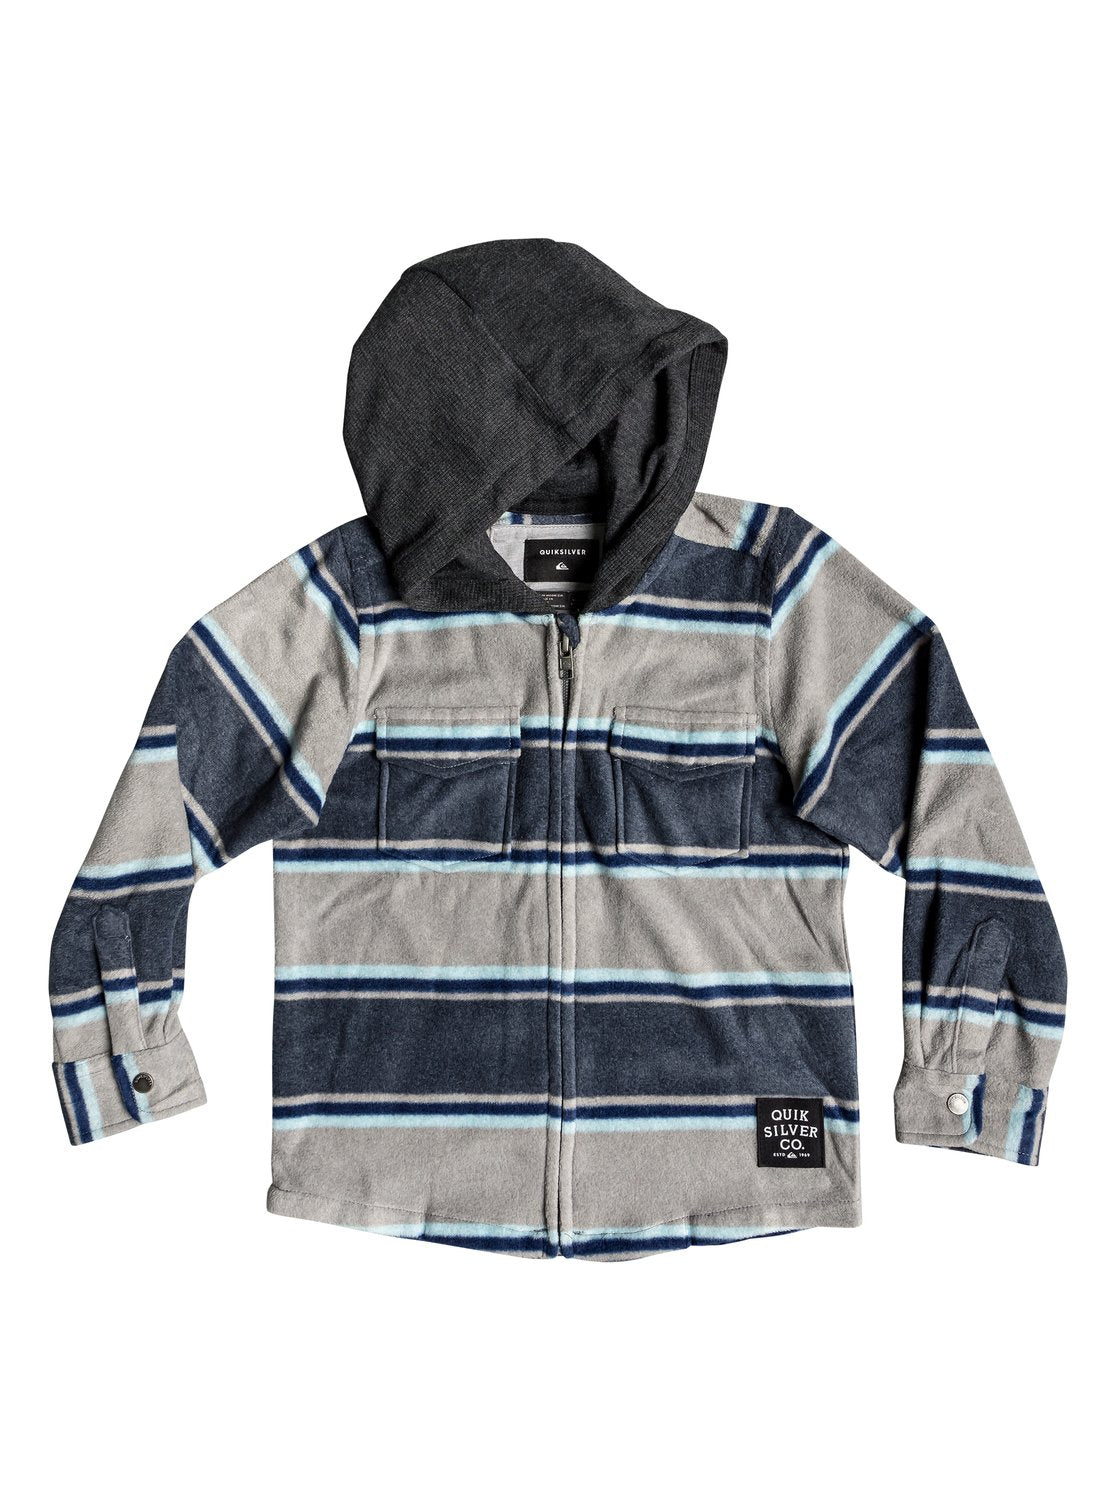 Quiksilver Surf Days Youth Jacket